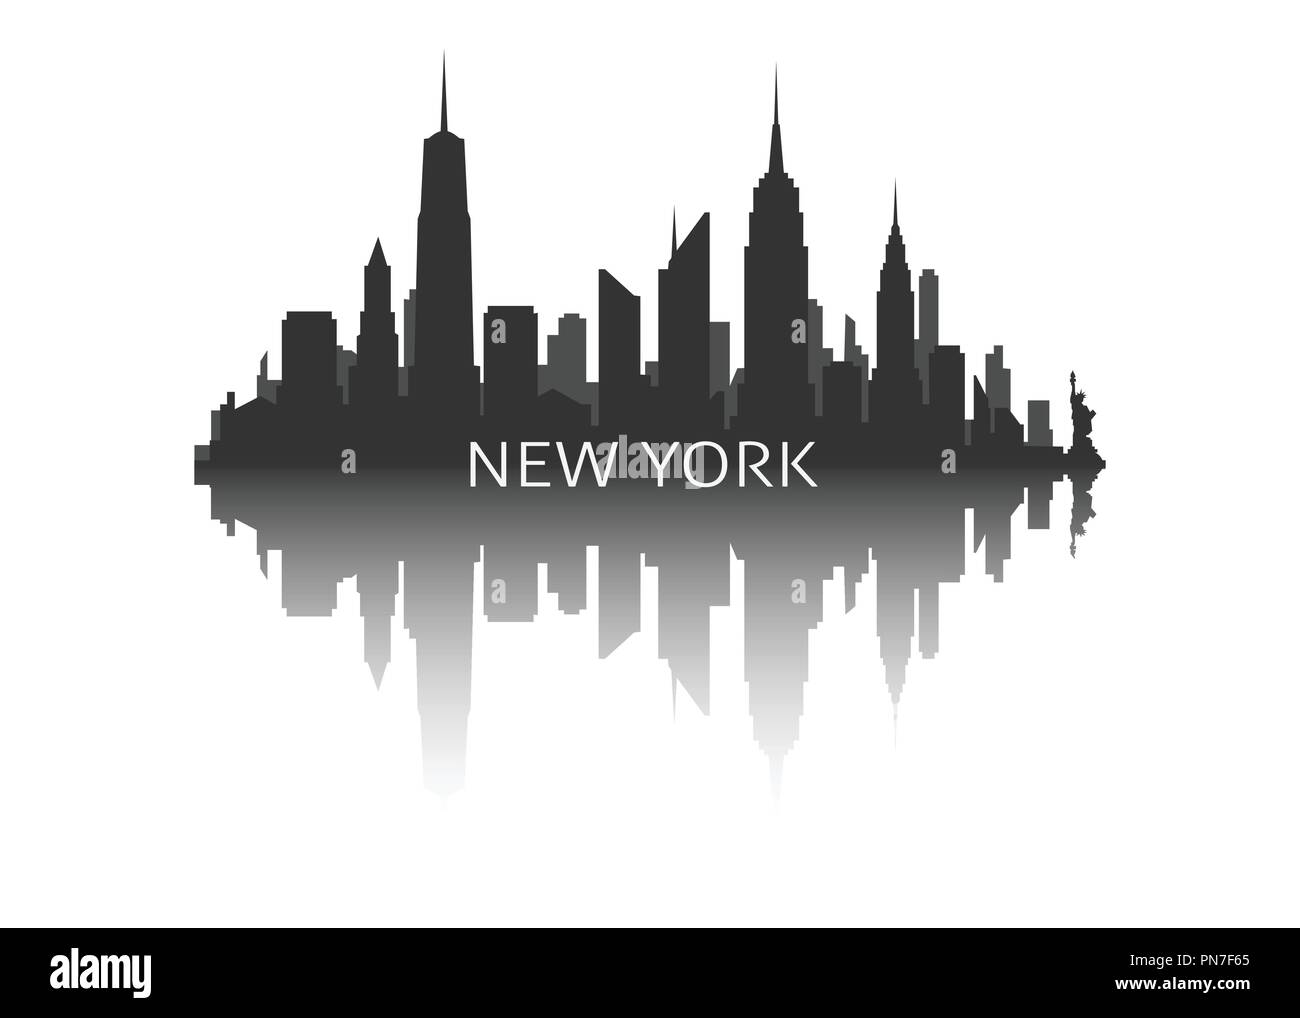 New York City Skyline Silhouette With Reflection Stock Vector Illustration Stock Vector Image Art Alamy